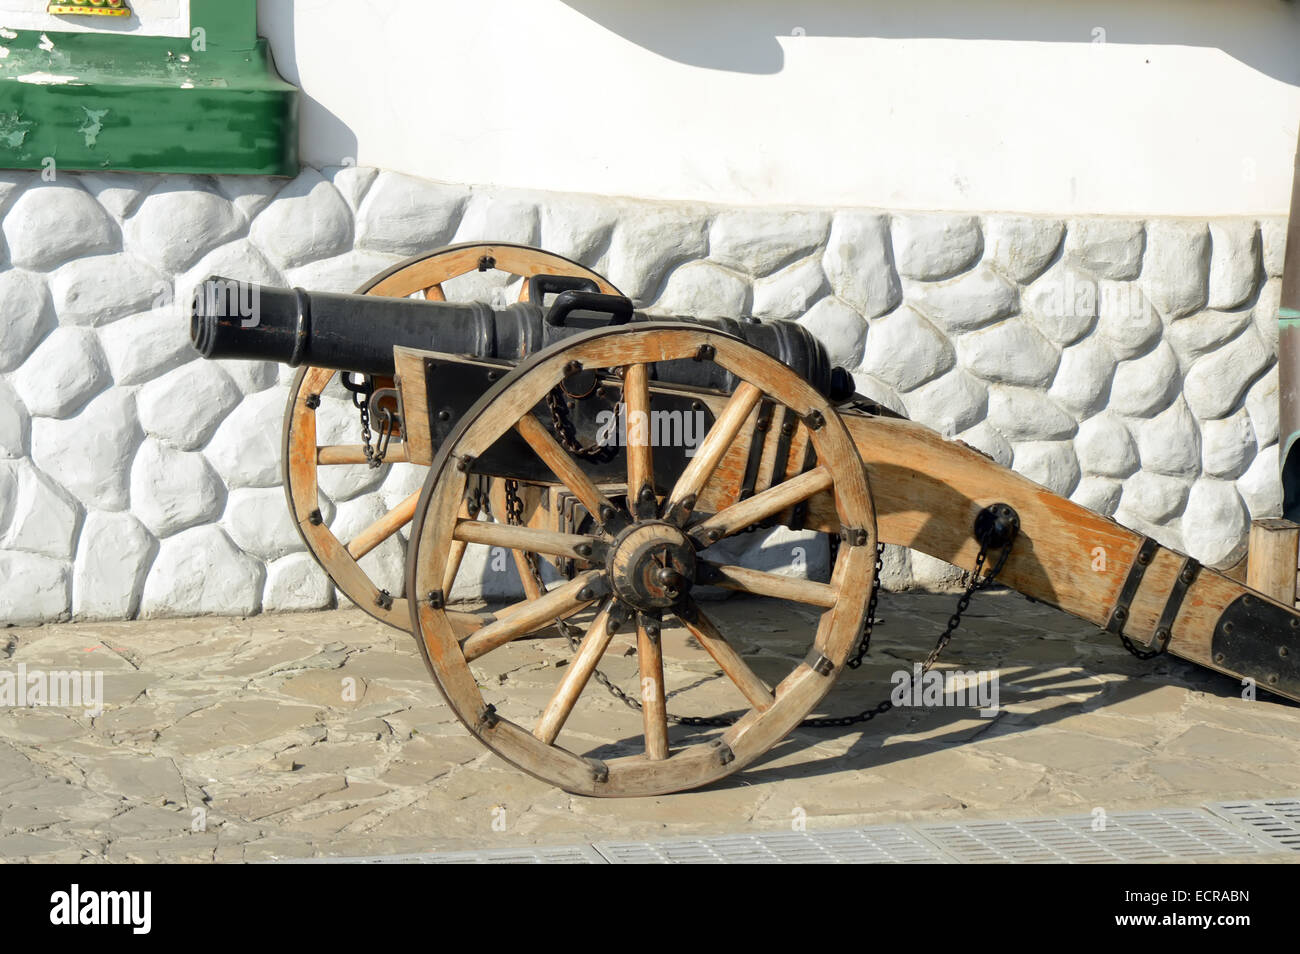 Two-wheeled artillery cannon Stock Photo